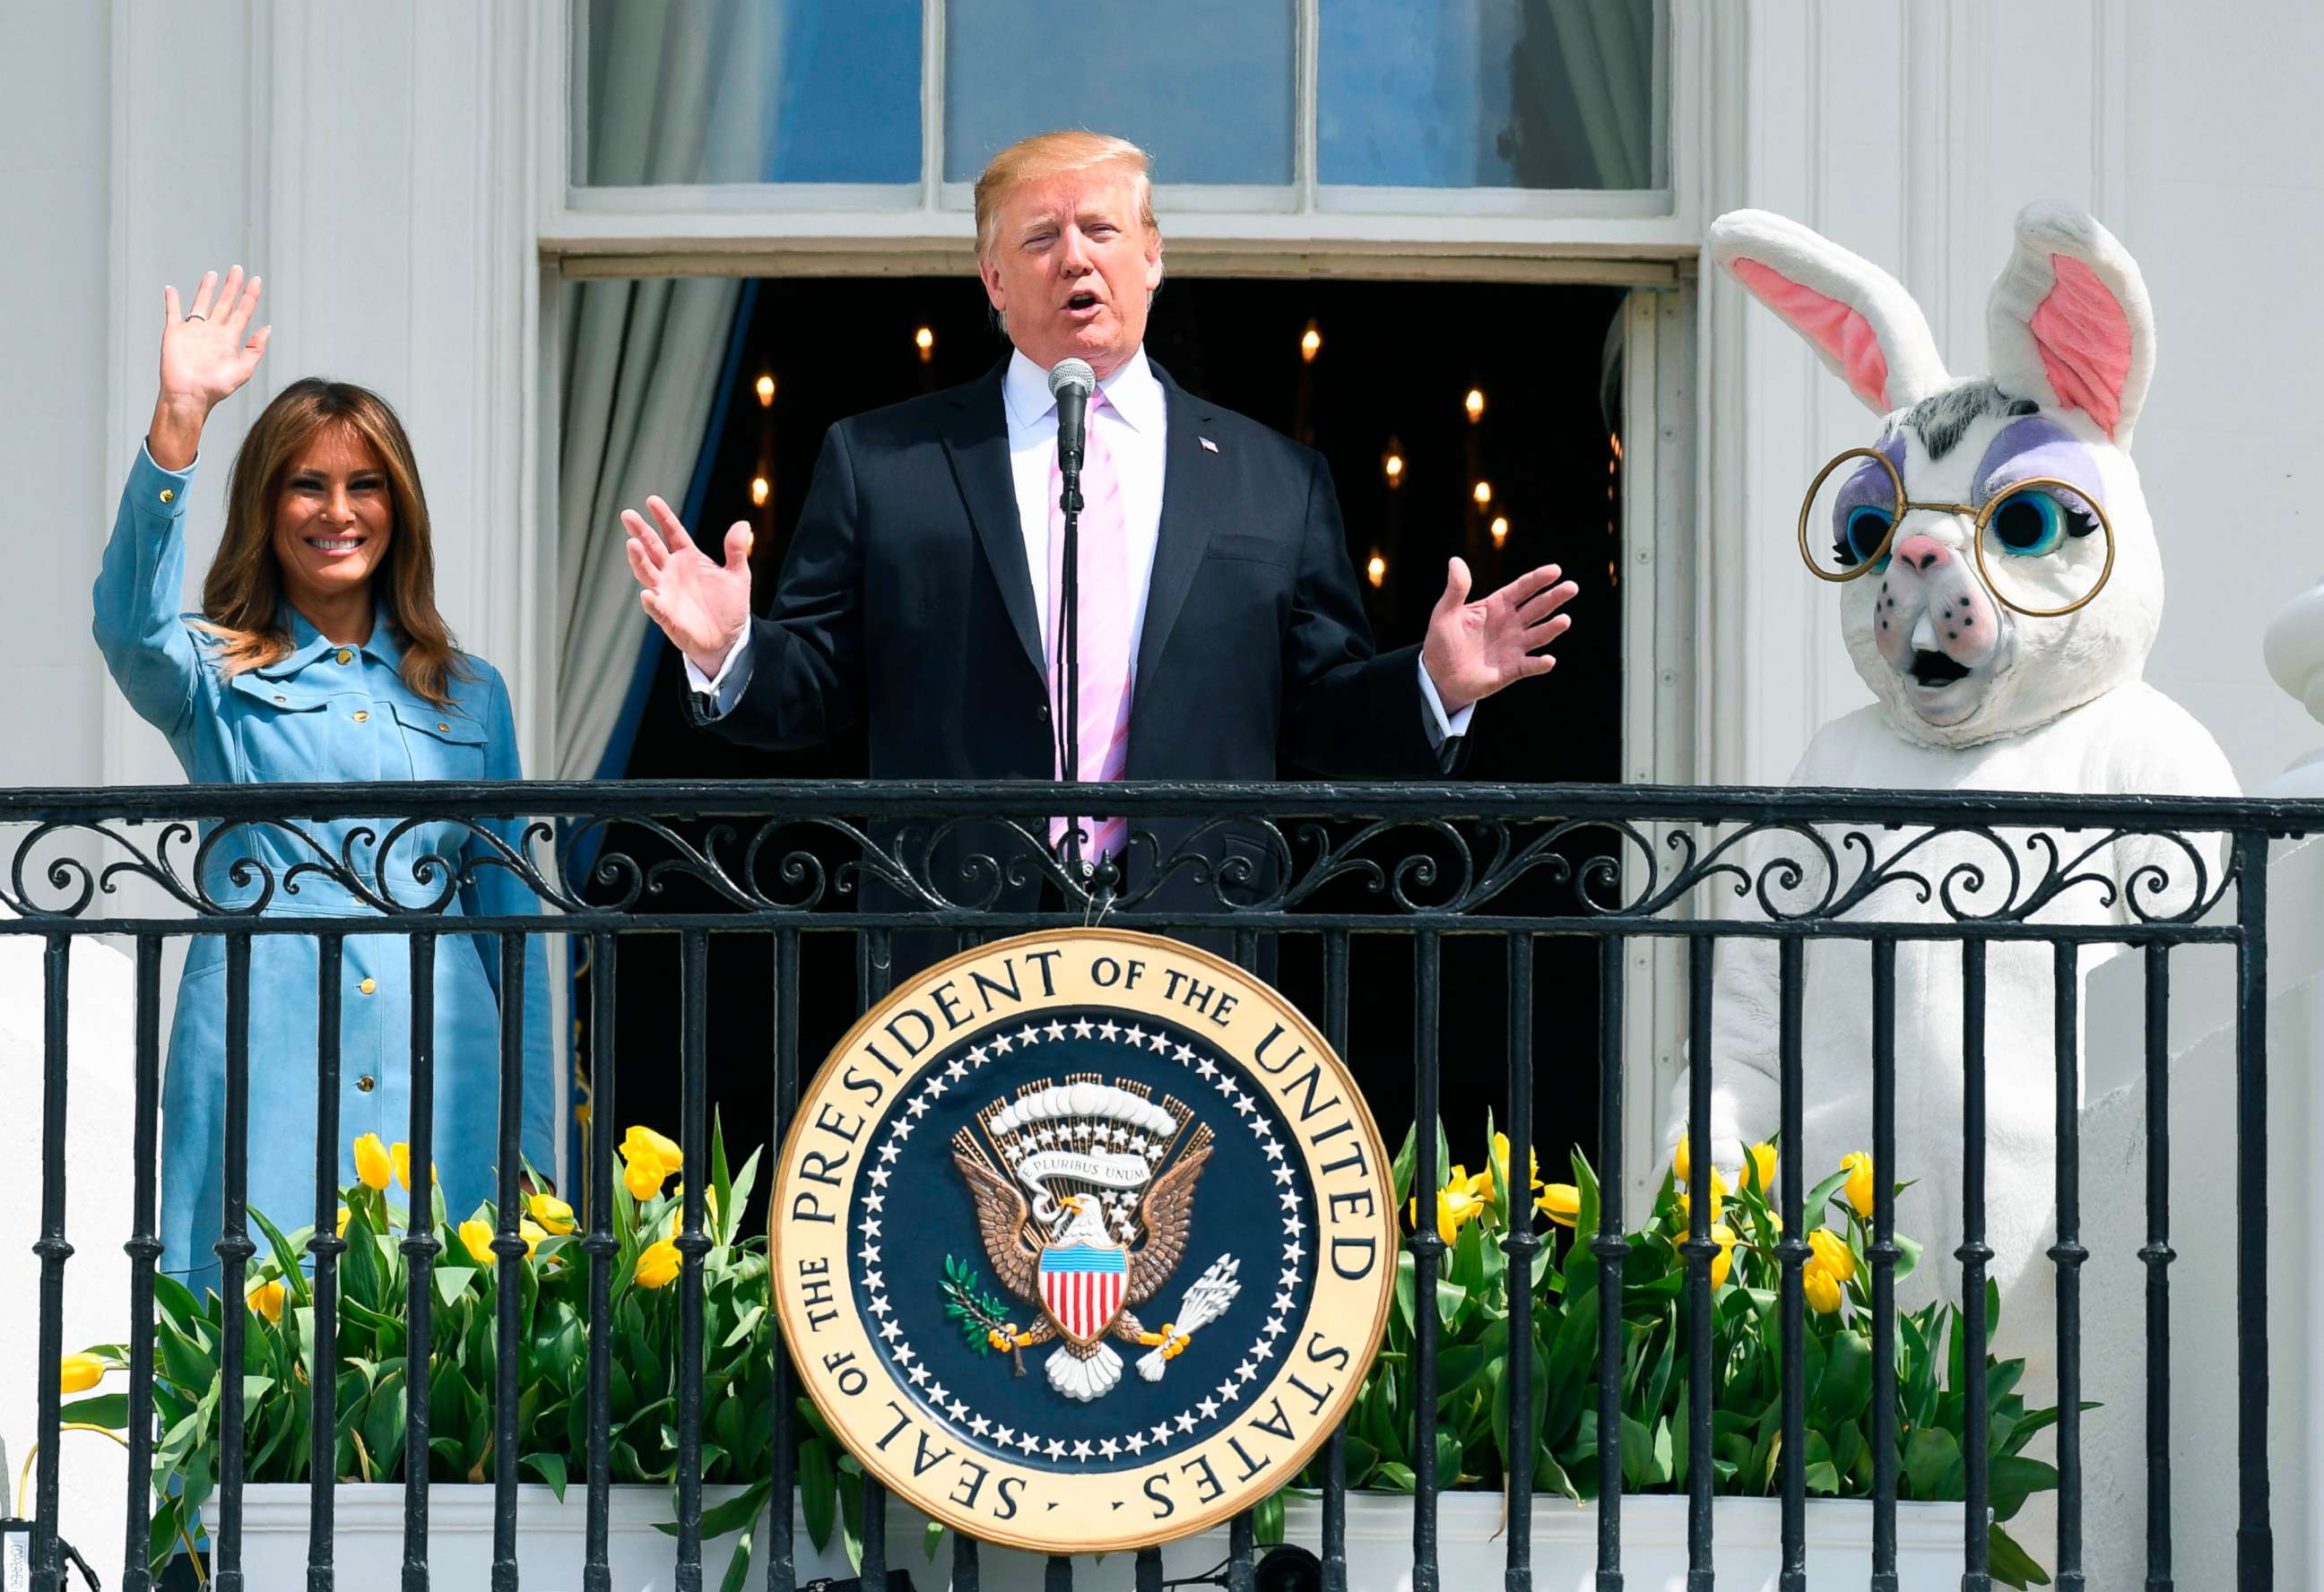 PHOTO: President Donald Trump speaks as First Lady Melania Trump waves during the annual White House Easter Egg Roll on the South Lawn of the White House, April 22, 2019.